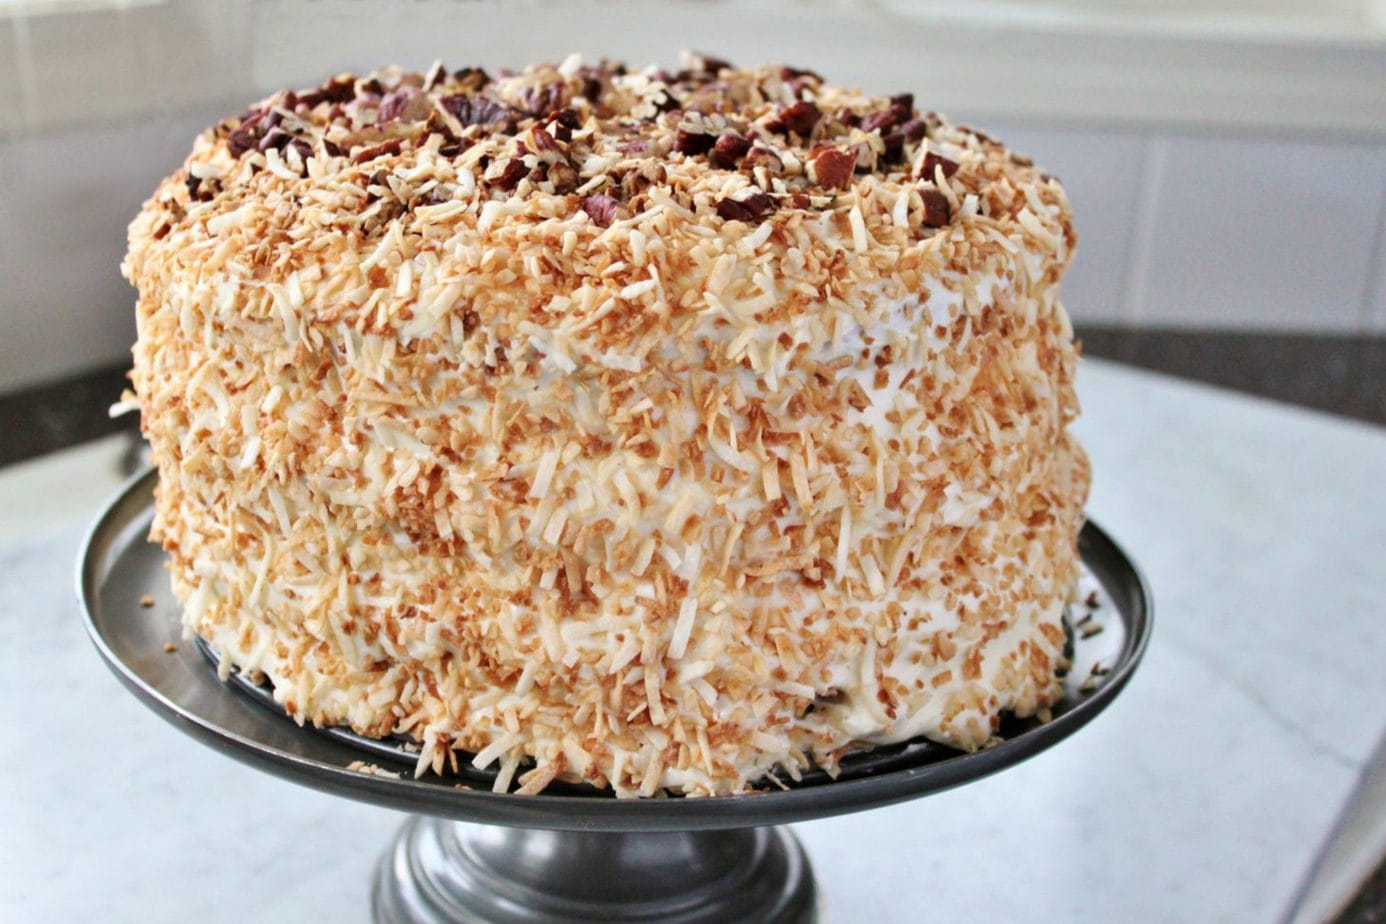 A decadent cream cake with pecans and coconut